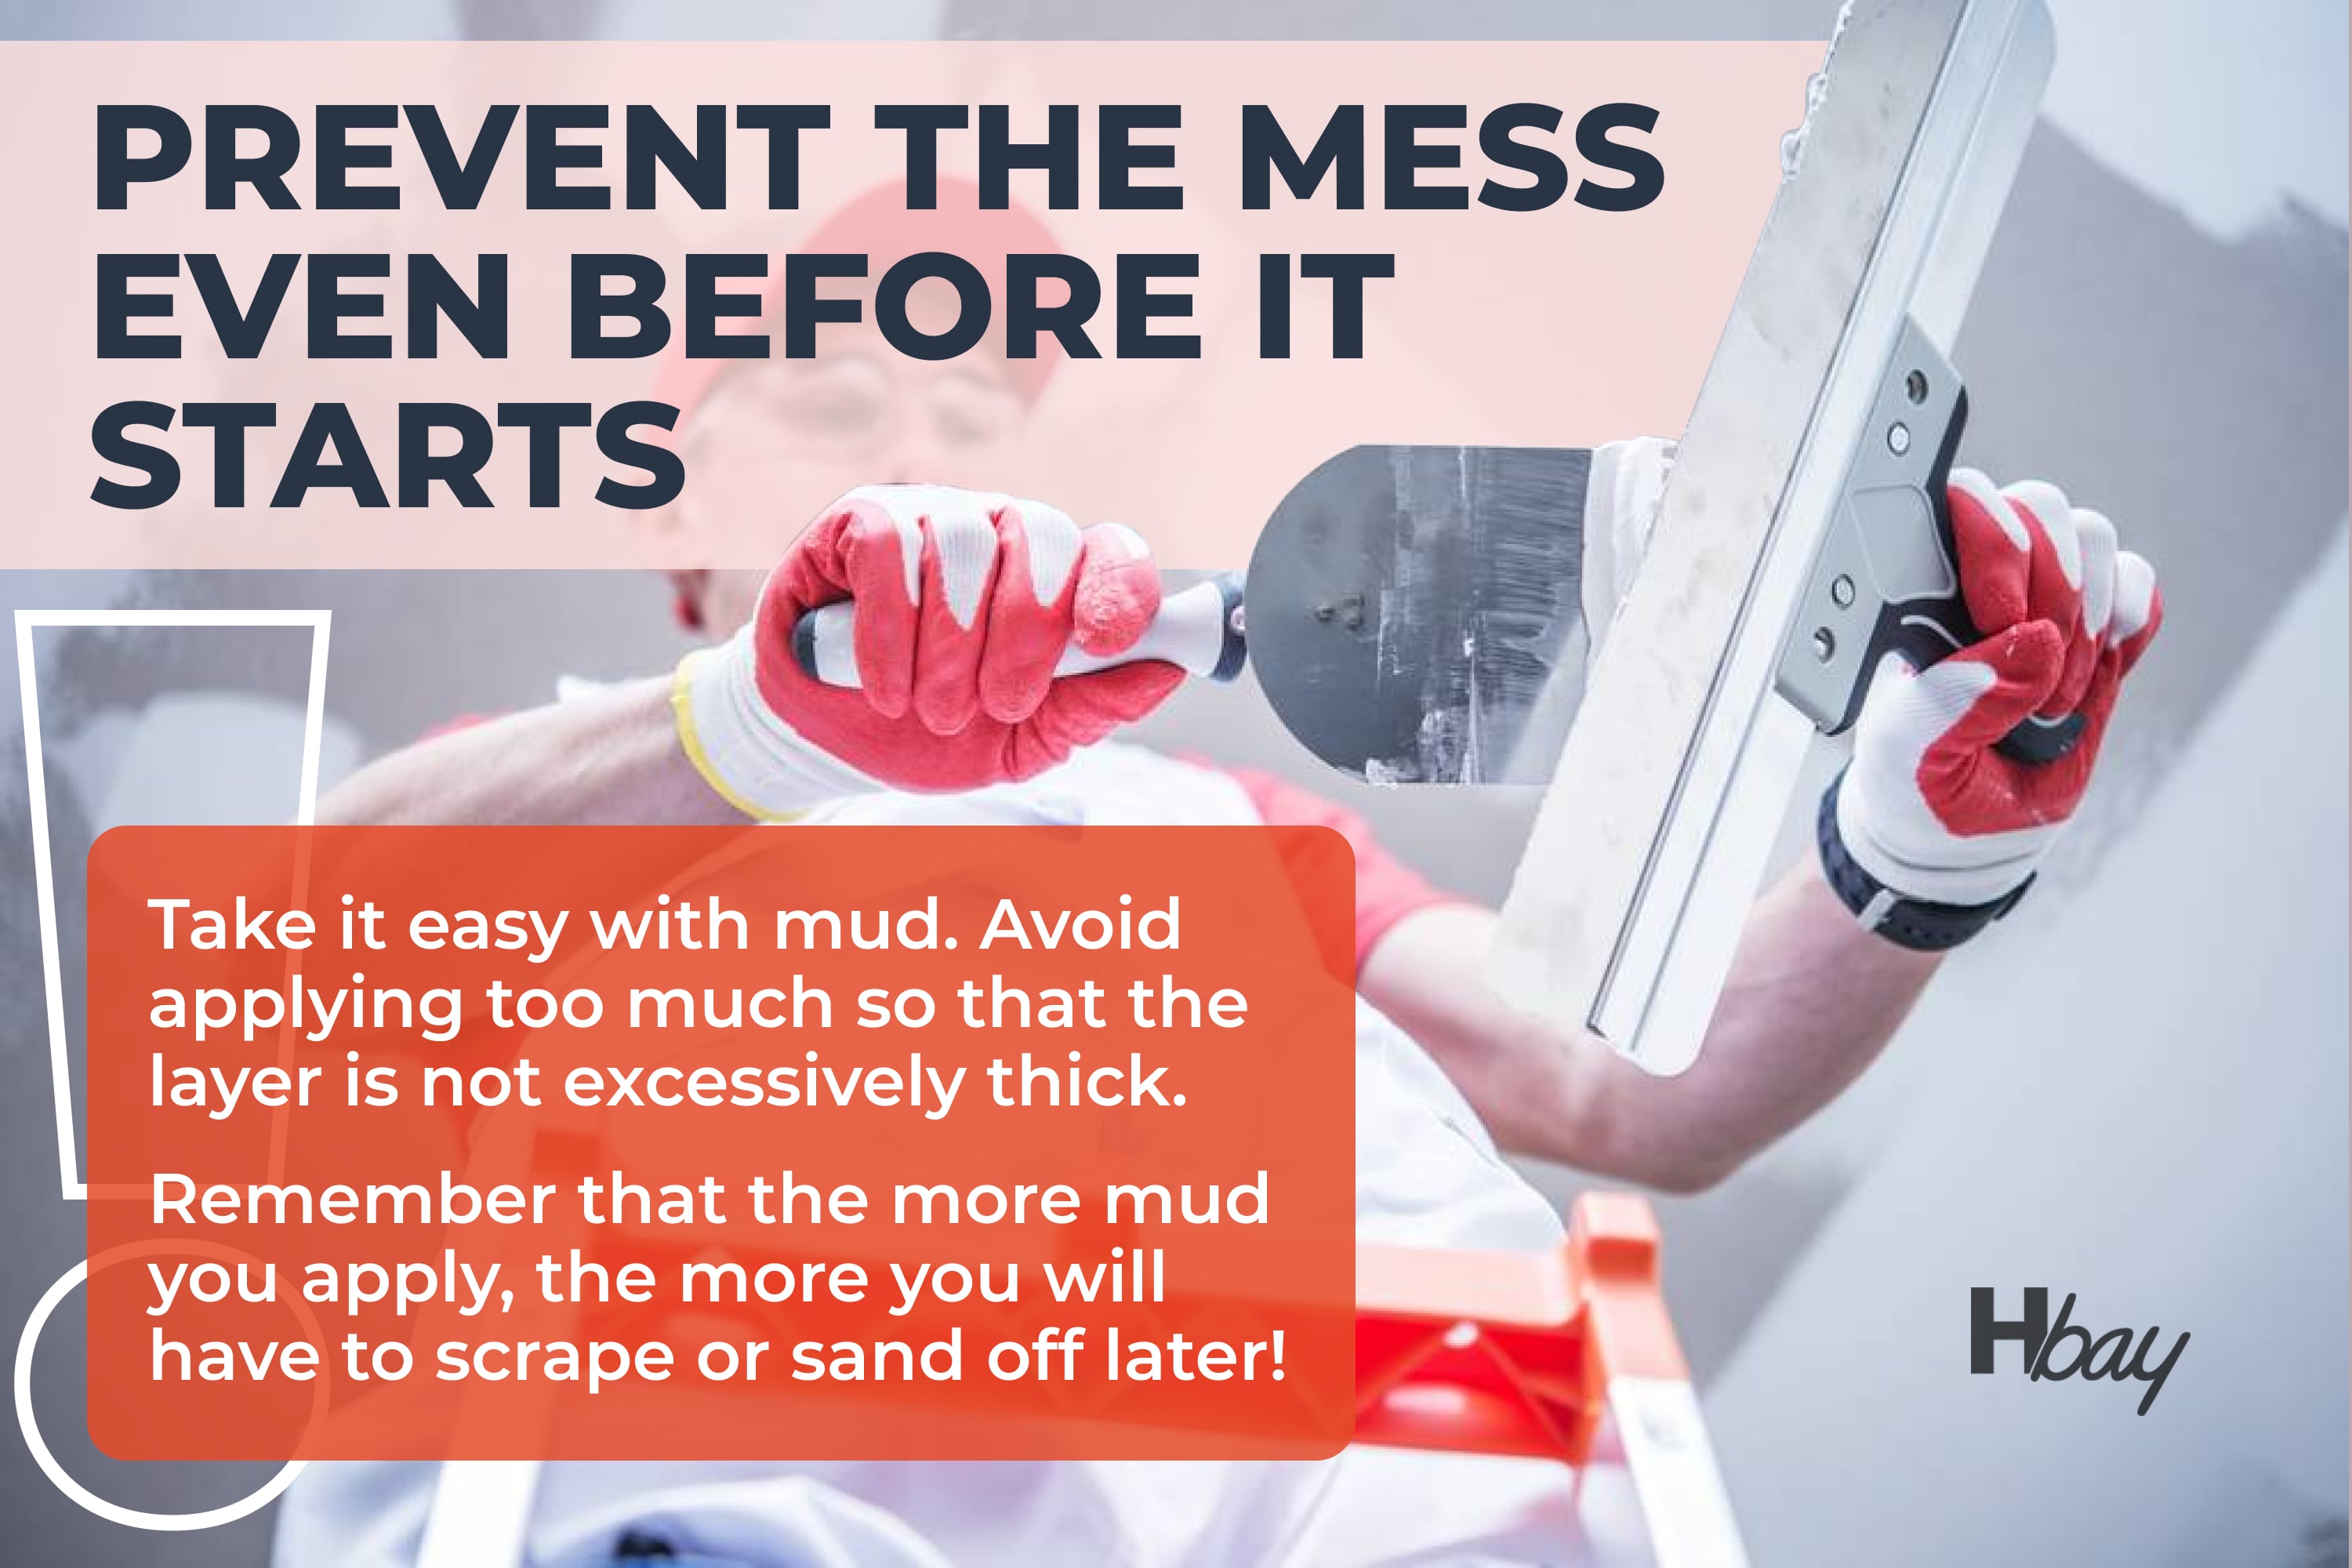 Prevent the Mess Even Before It Starts